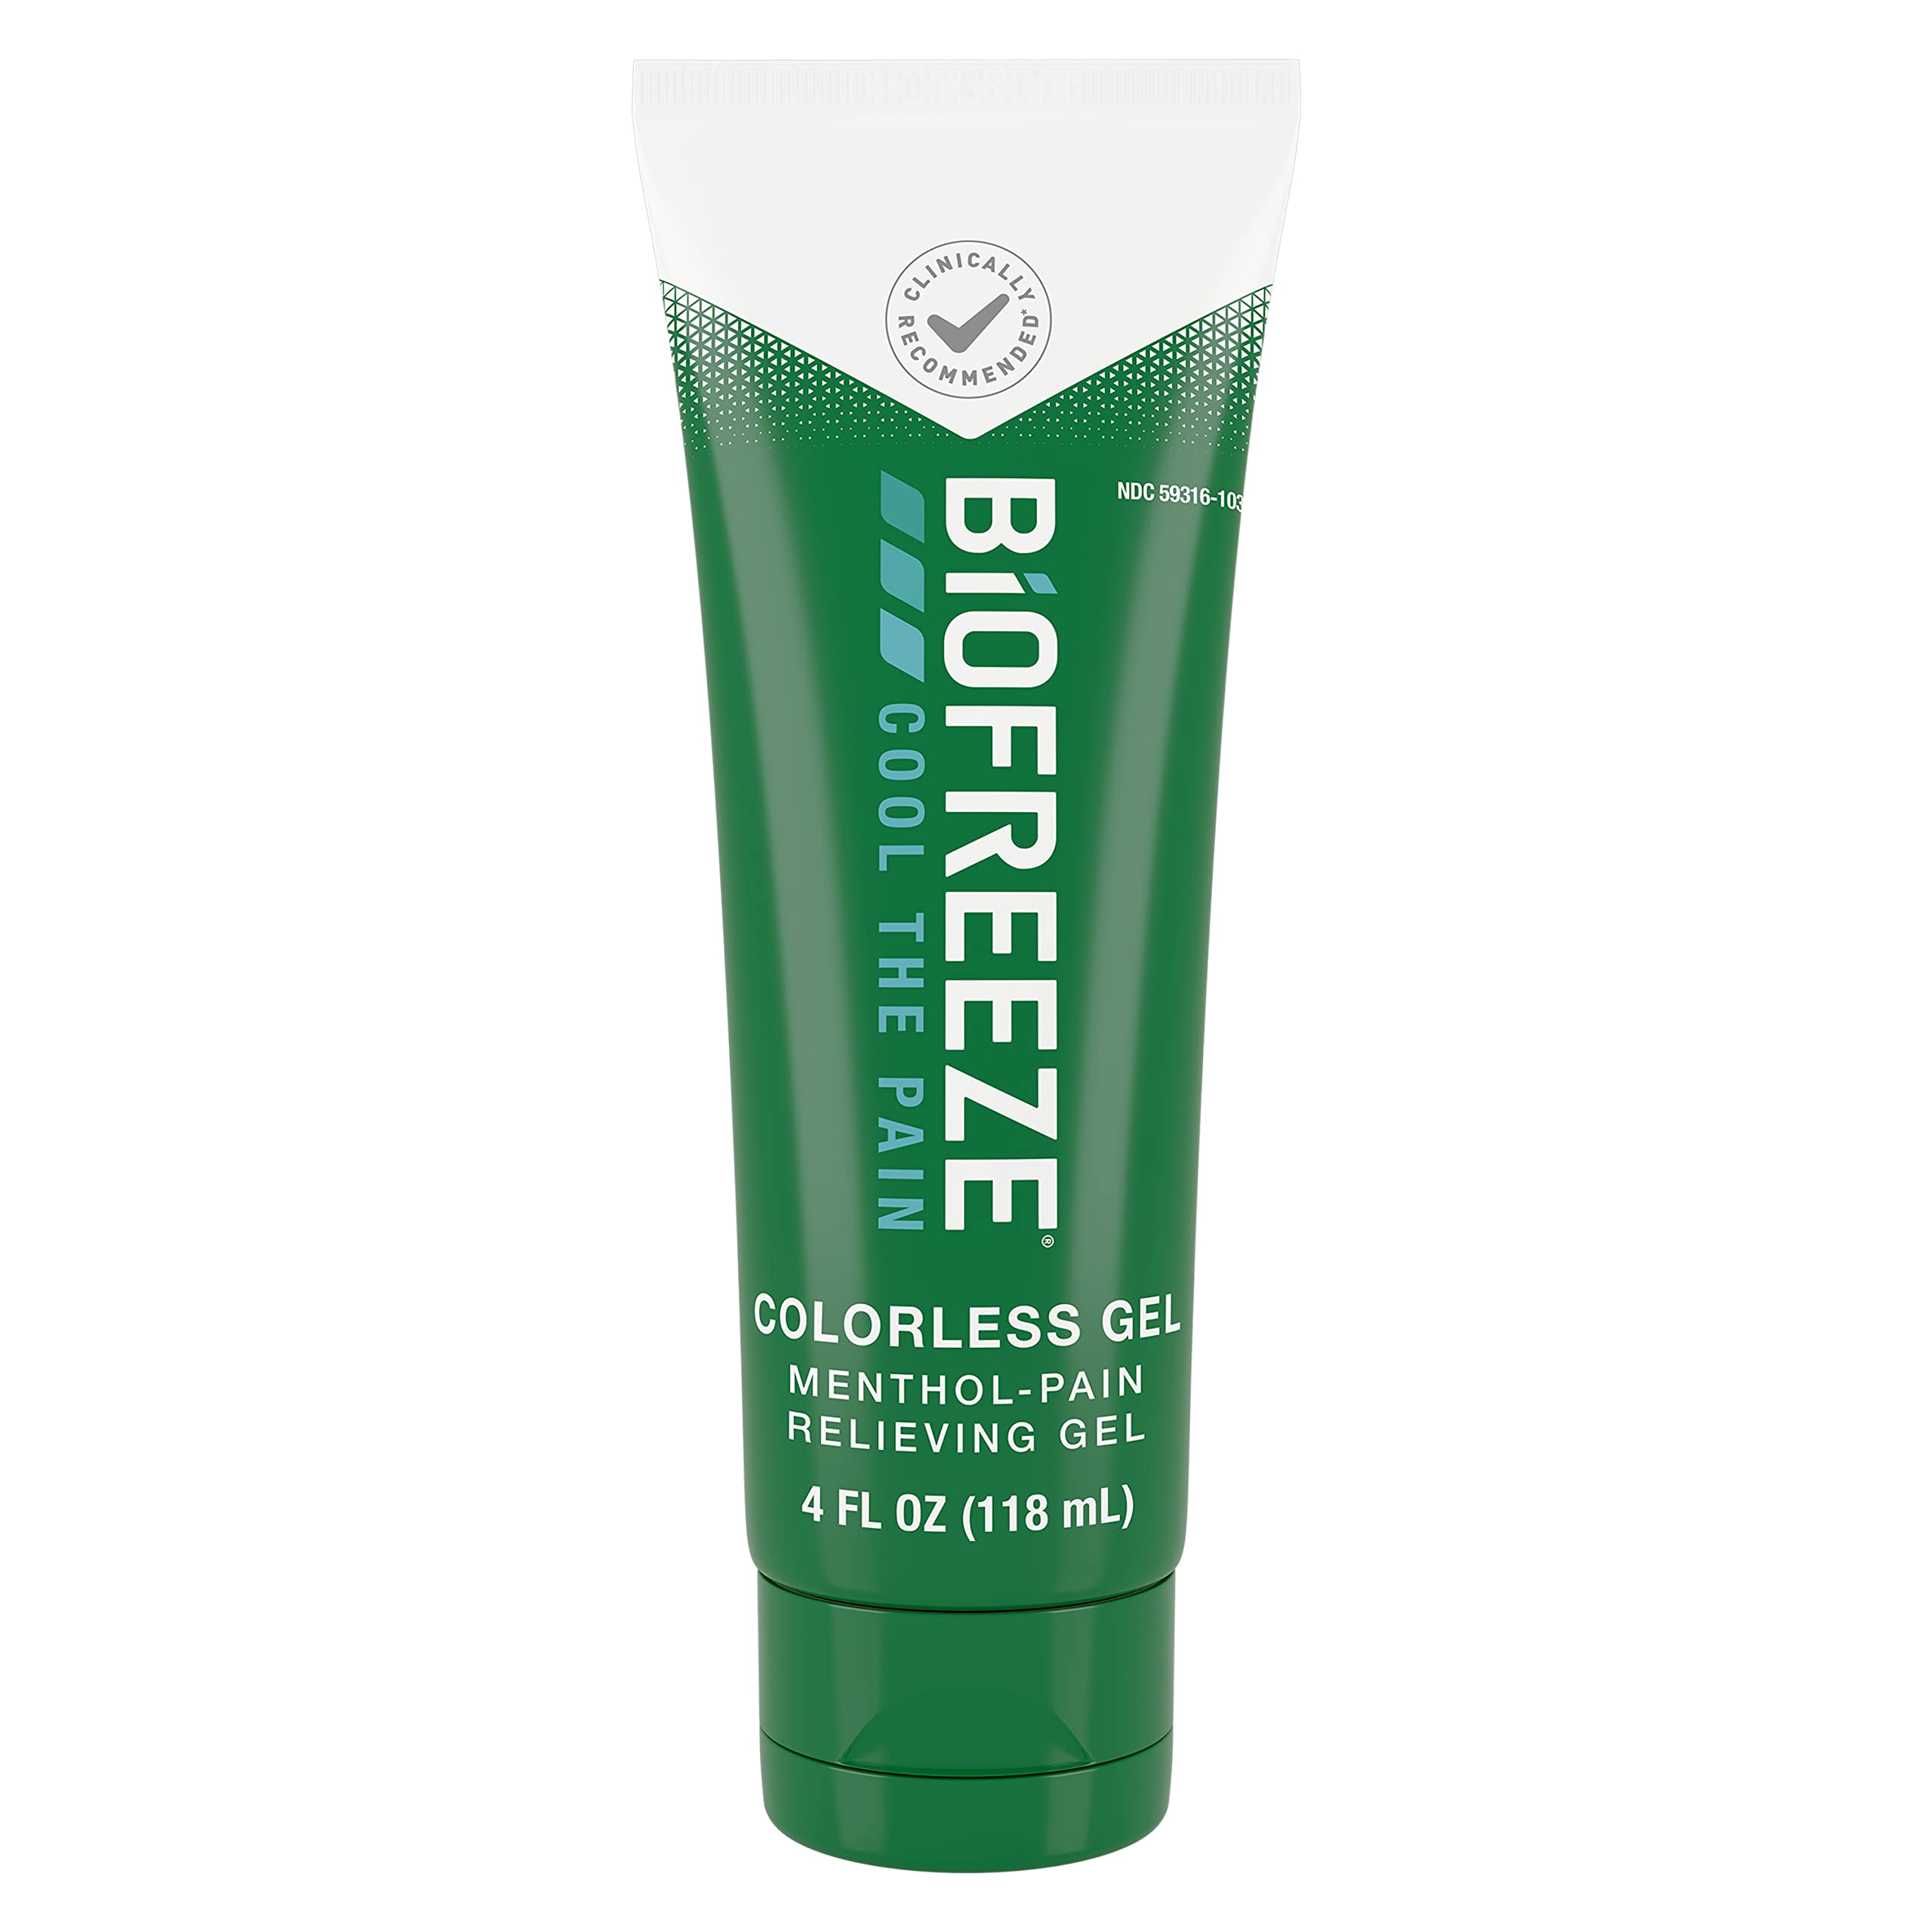 Biofreeze Menthol Pain Relieving Colorless Gel 4 FL OZ Tube For Pain Relief Associated With Sore Muscles, Arthritis, Simple Backaches, And Joint Pain (Packaging May Vary)